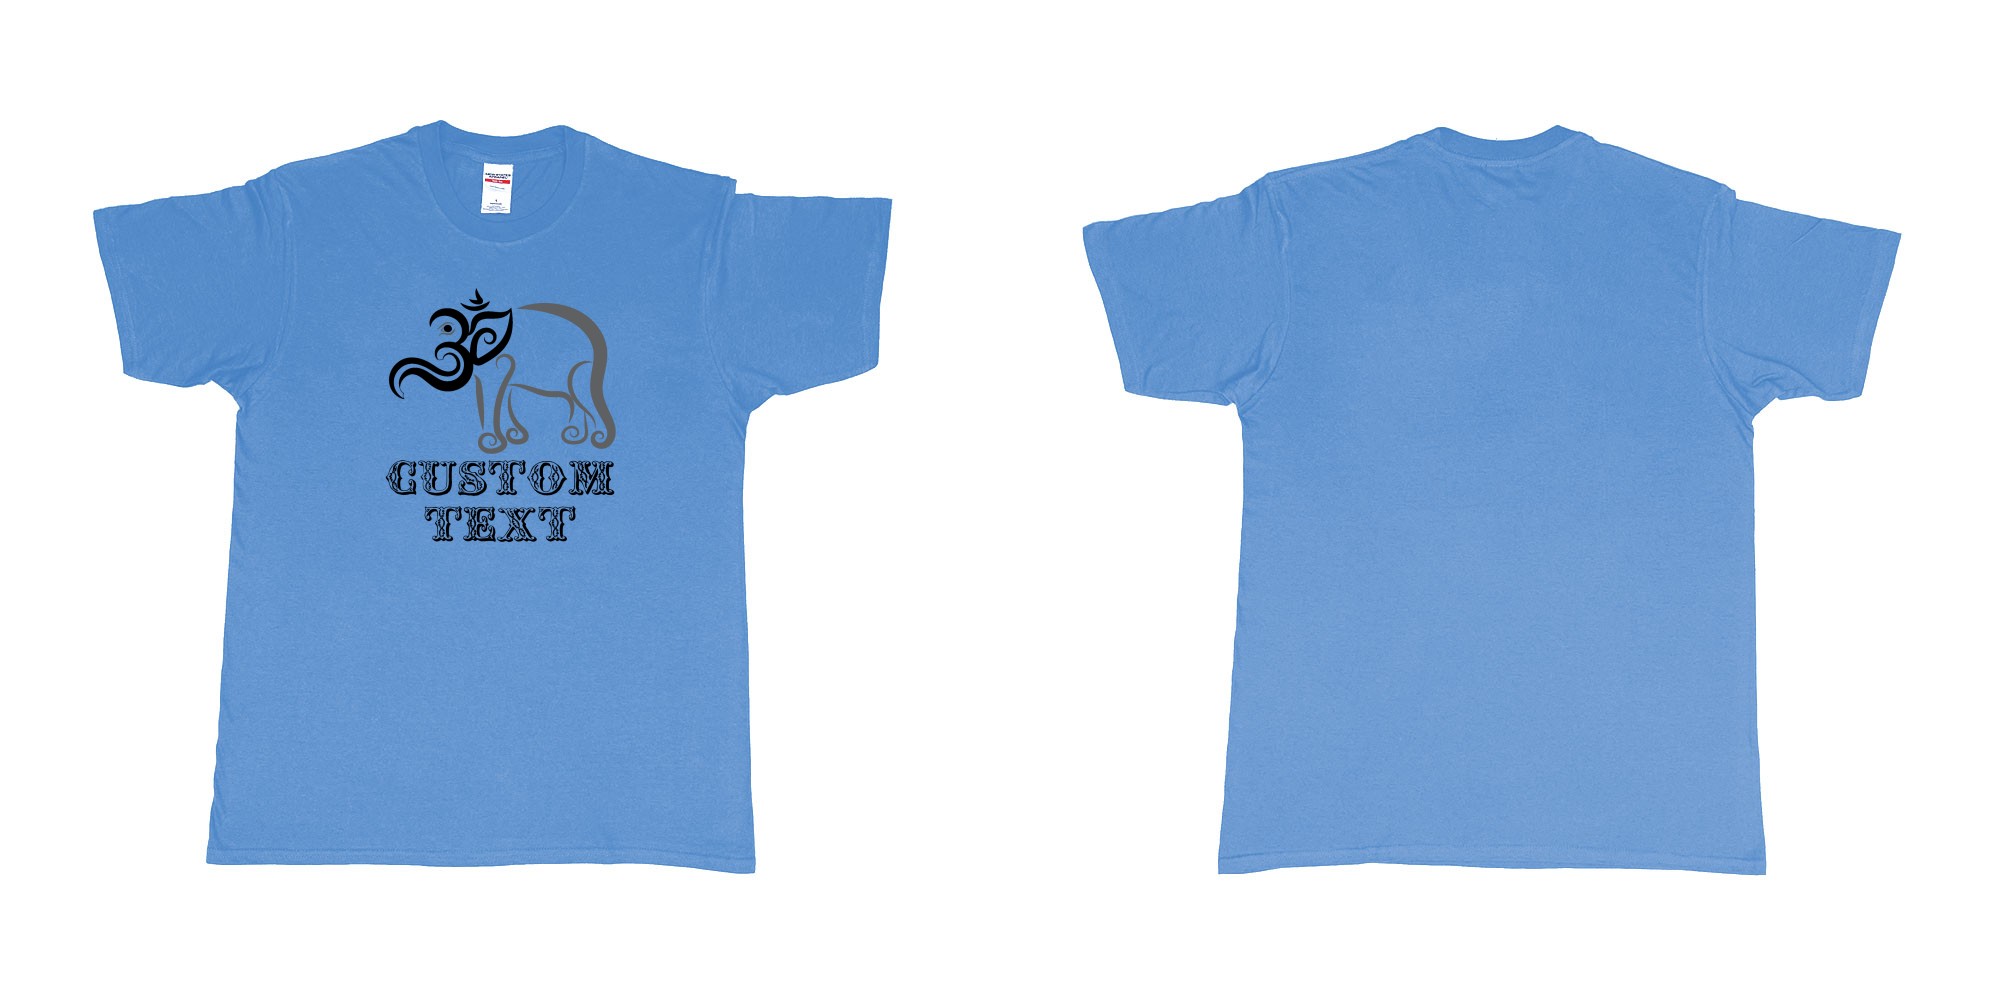 Custom tshirt design om elephant design in fabric color carolina-blue choice your own text made in Bali by The Pirate Way